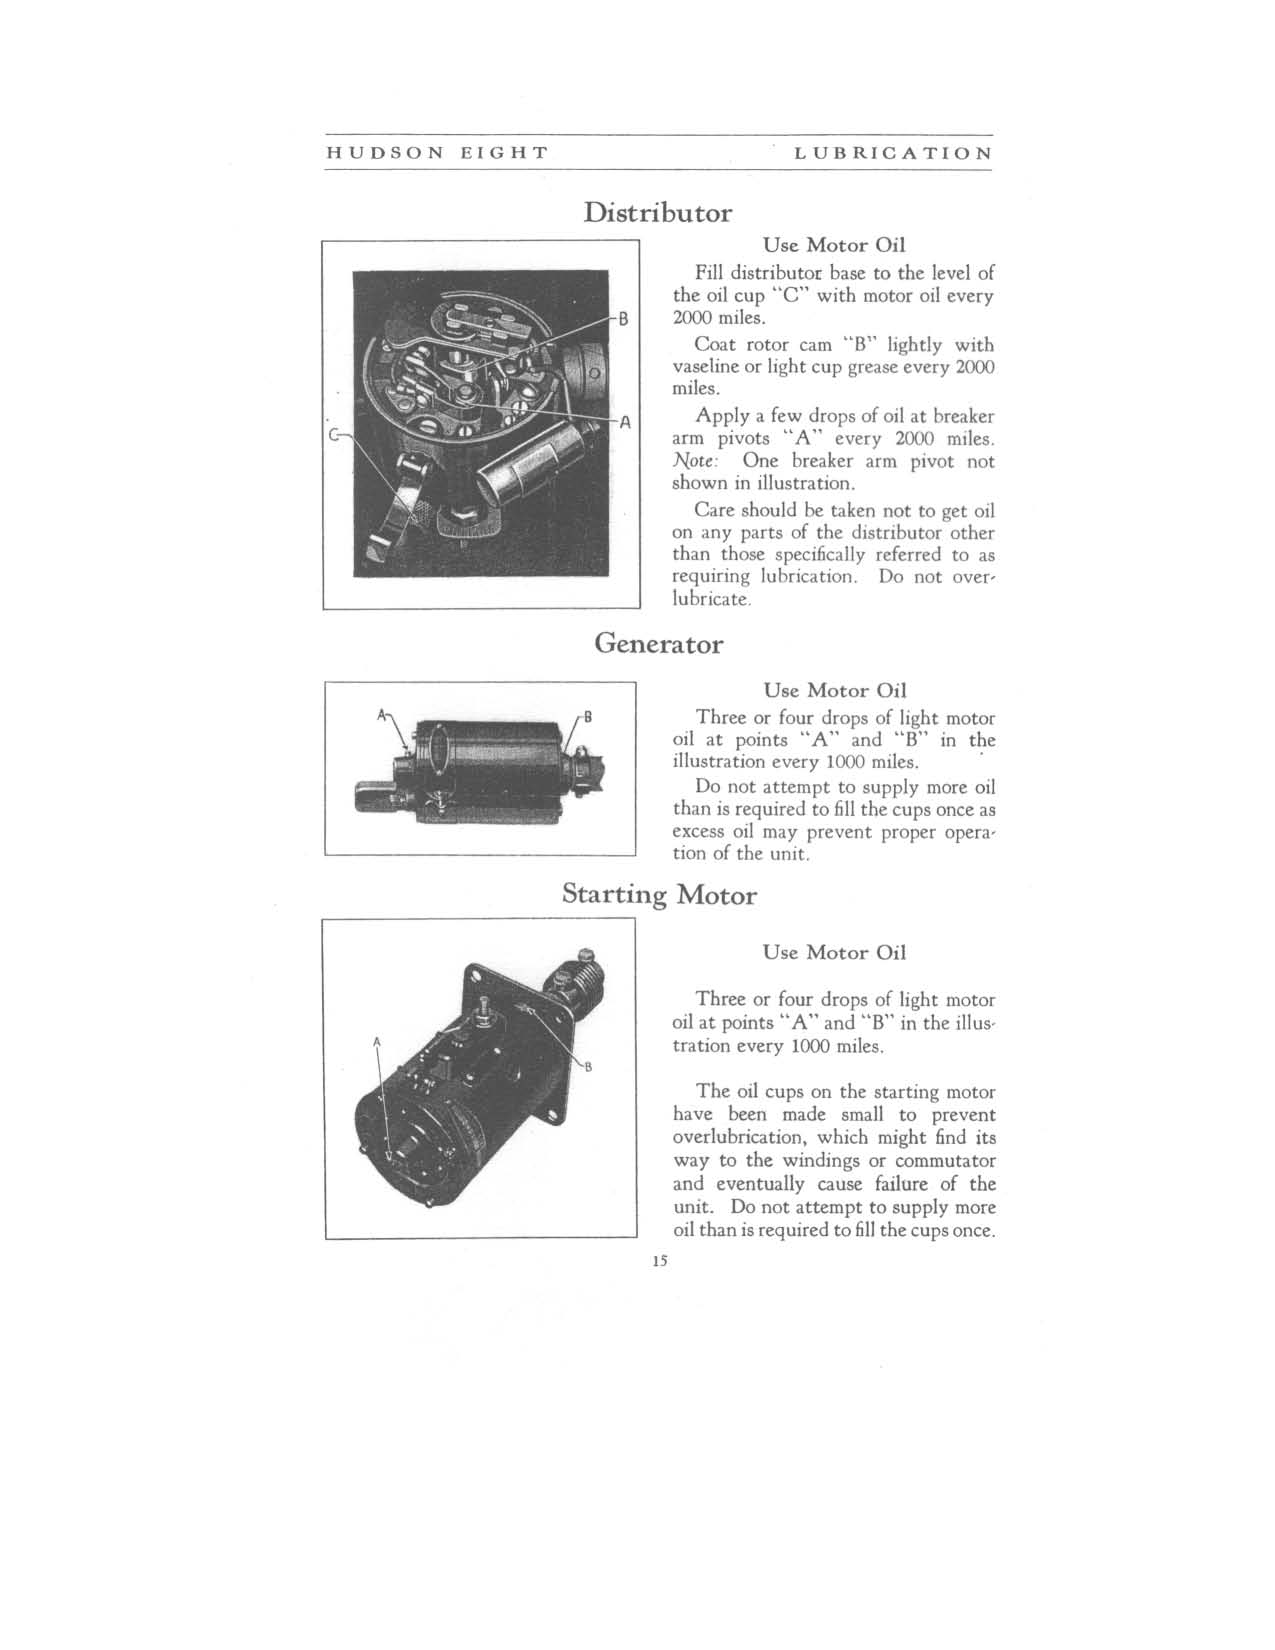 1931 Hudson 8 Instruction Book Page 5